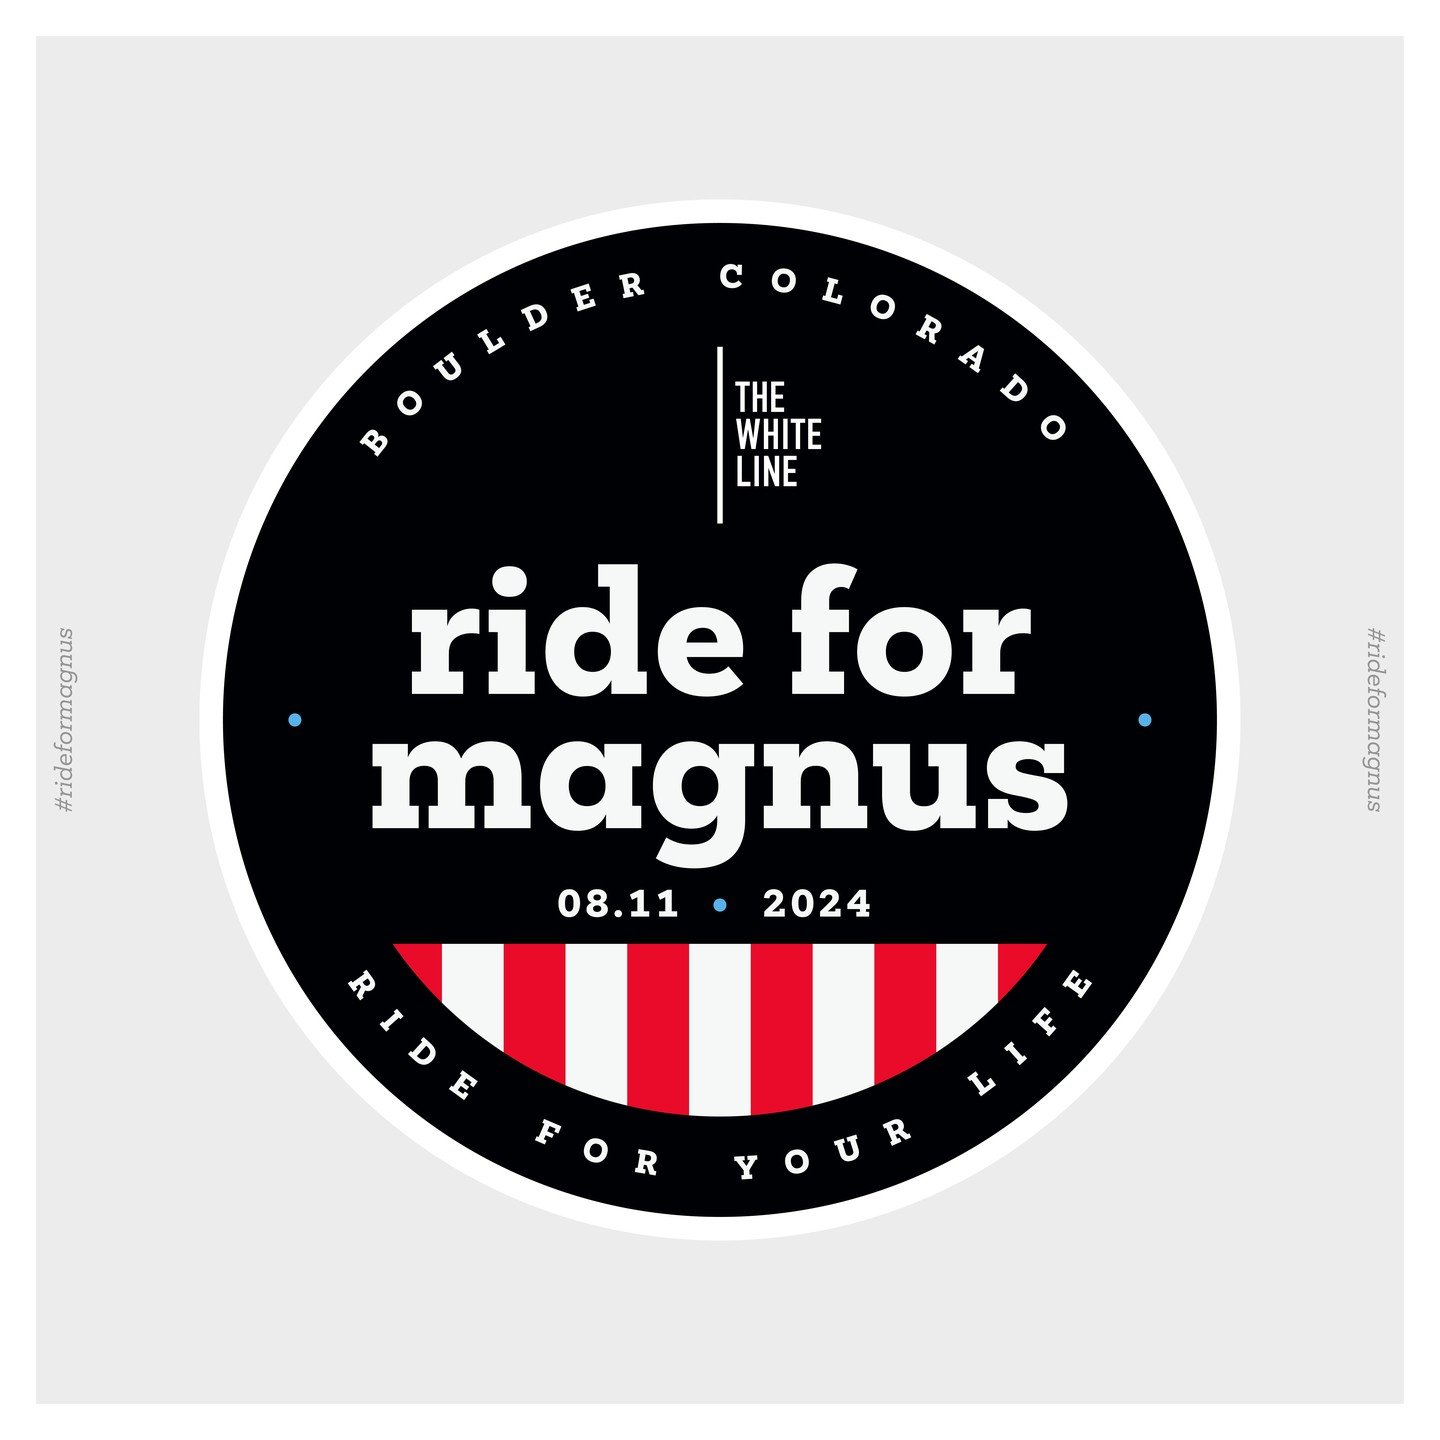 The White Line announces the &ldquo;Ride for Magnus: Ride for Your Life&rdquo; memorial bike ride on August 11, 2024, in honor of Magnus White, the rising U.S. cycling star who was struck and killed by a driver on July 29, 2023, while training just o